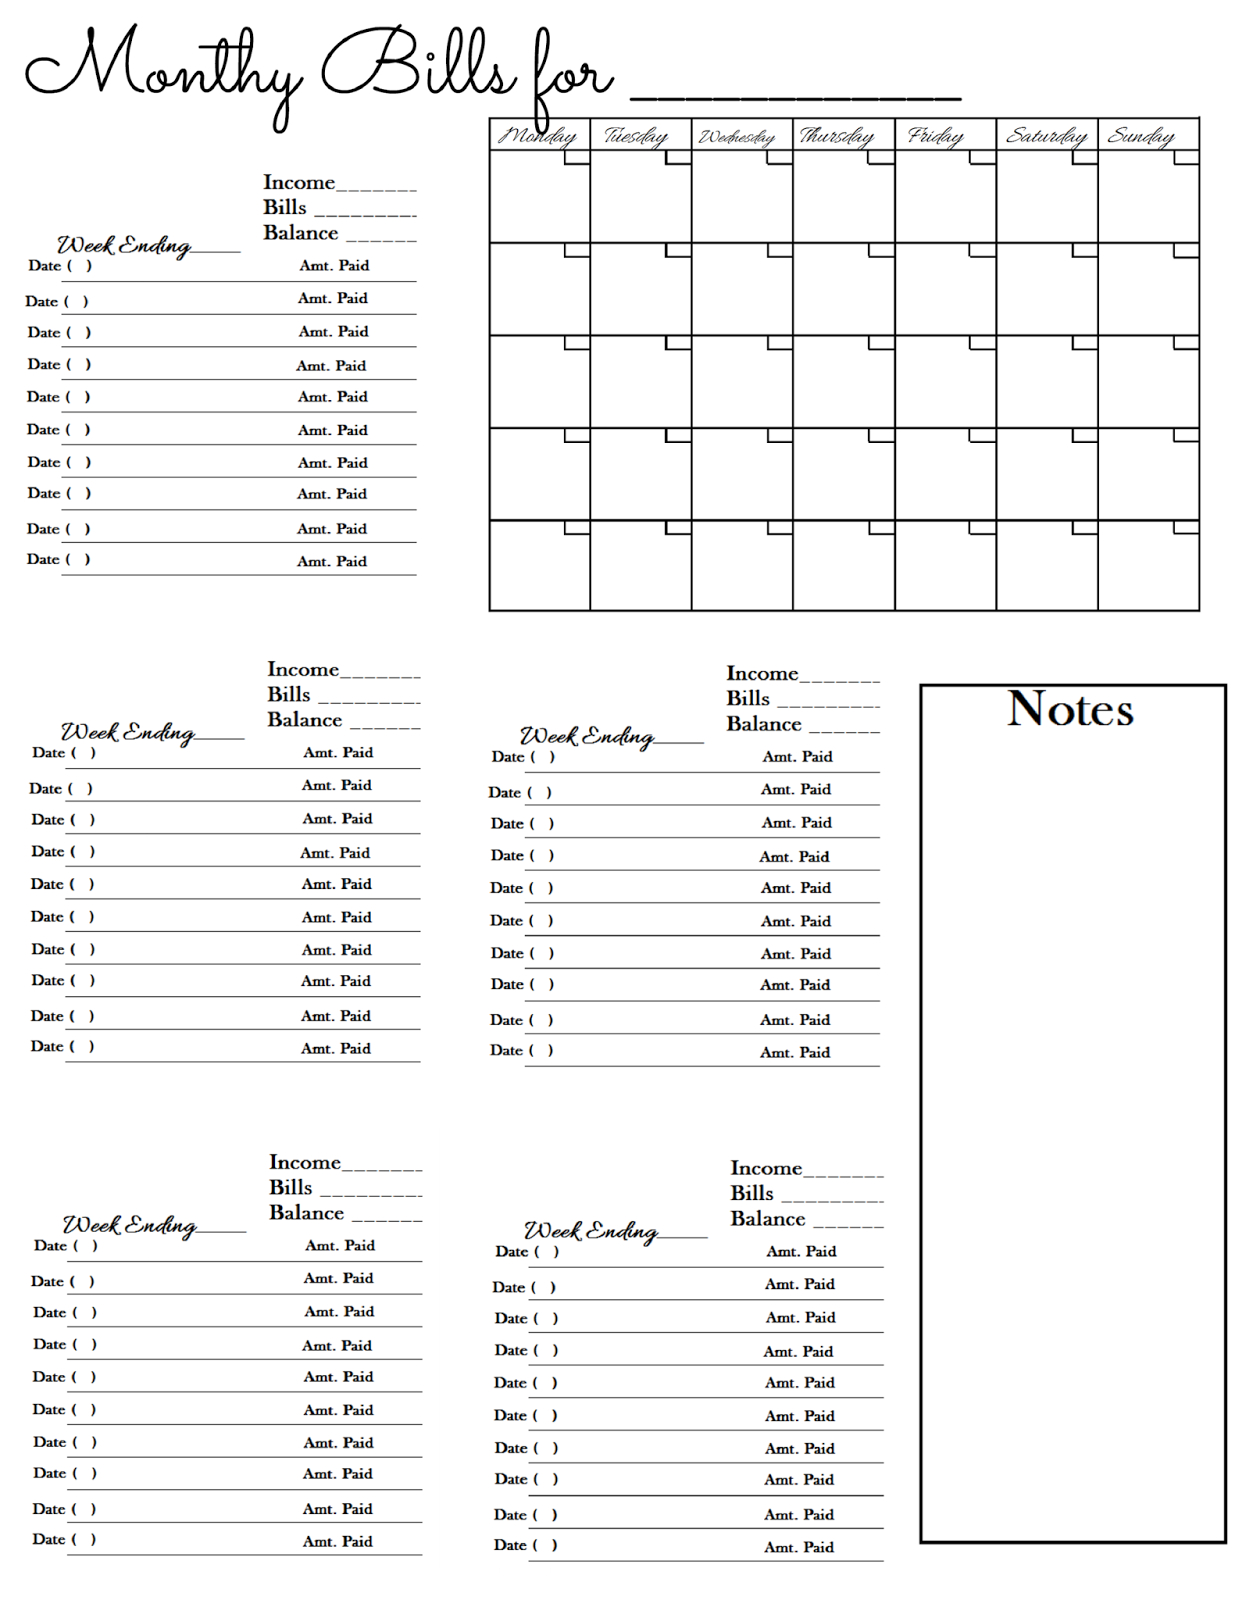 This Is A Simple Worksheet I Use To Keep Track Of My Paid with regard to Monthly Bills Worksheet